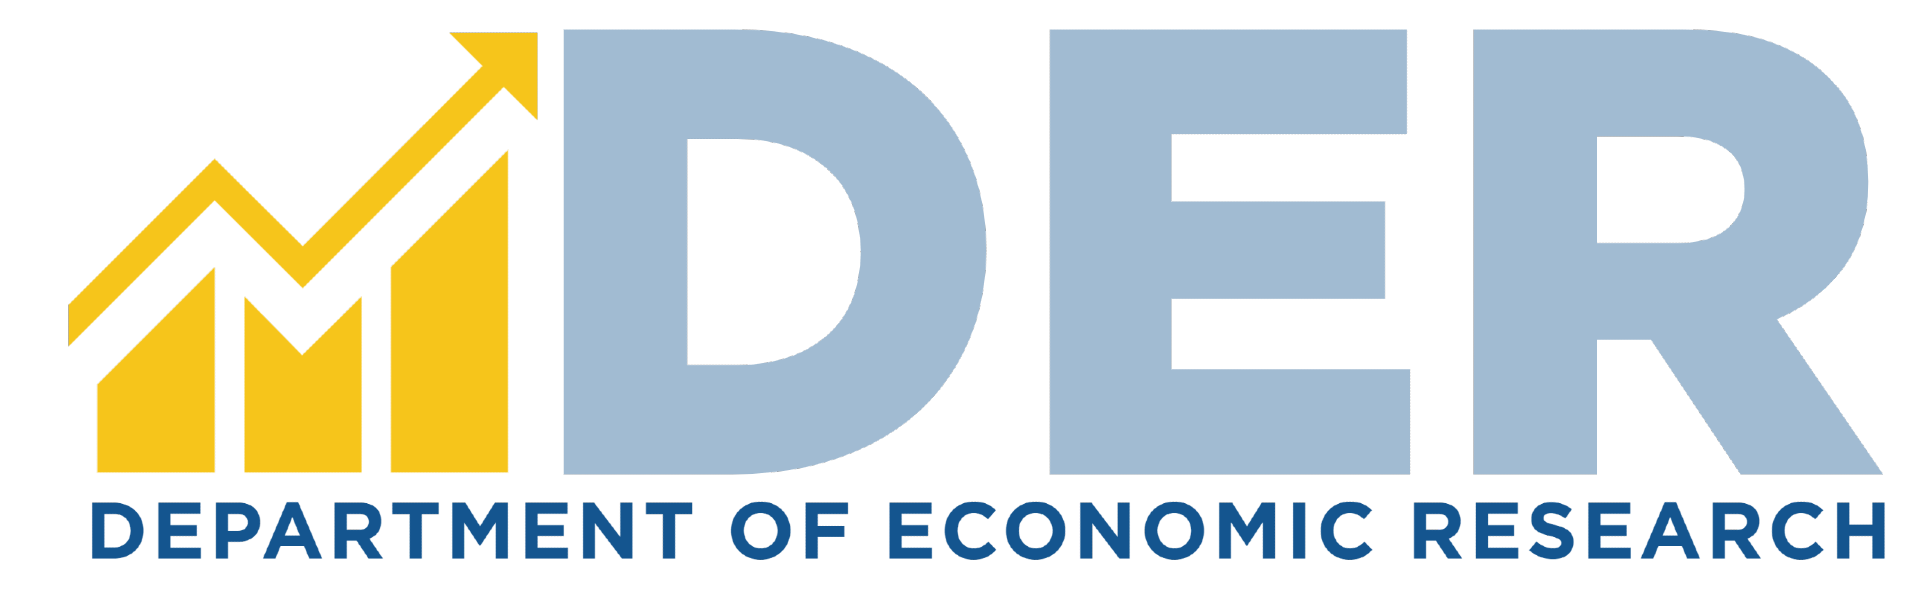 Department of Economic Research 